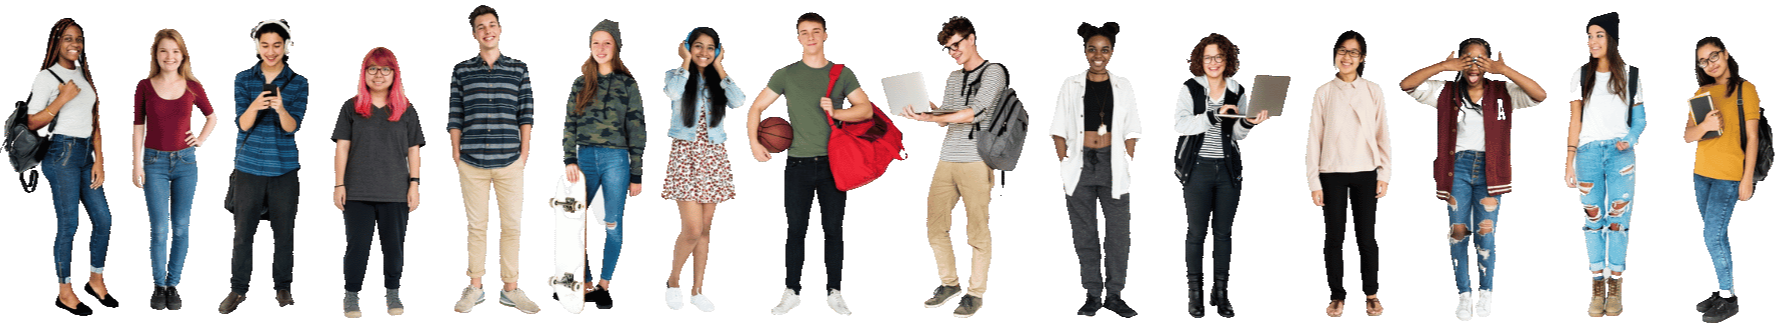 image of a variety of students in a horizontal row with a transparent background